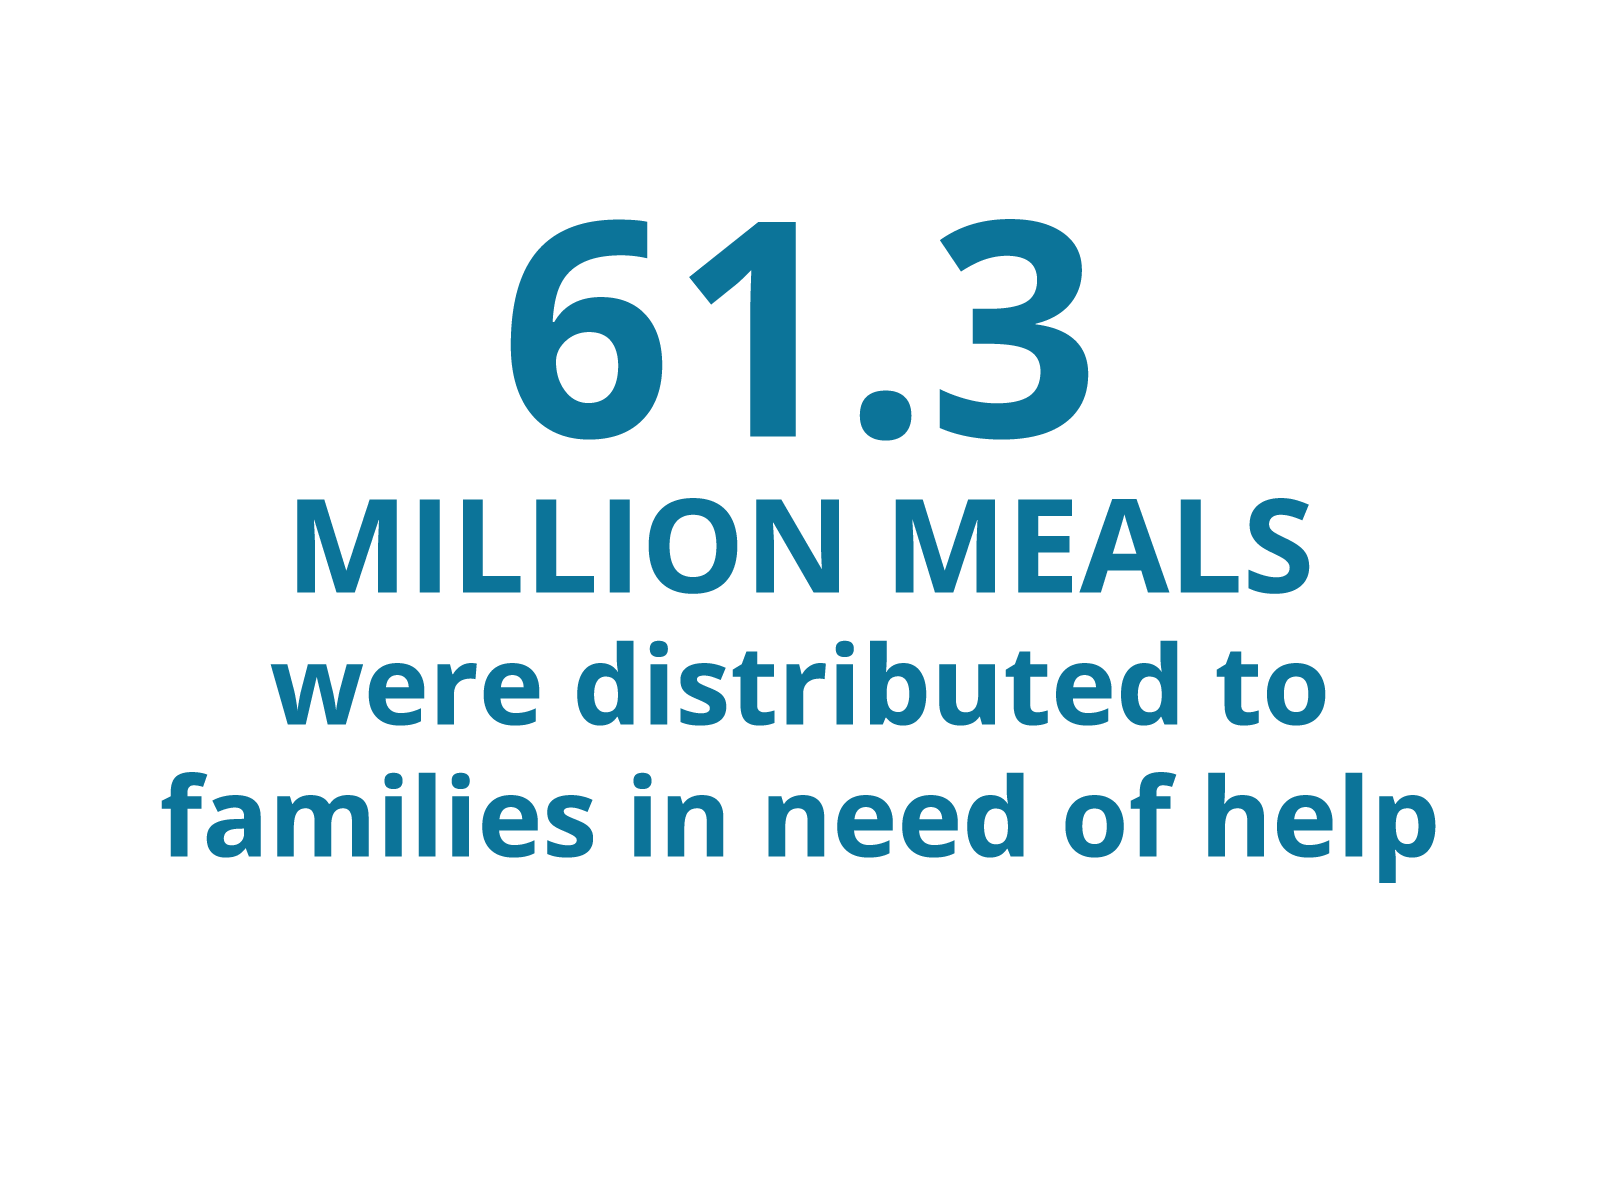 61.3 million meals were distributed to families in need of help